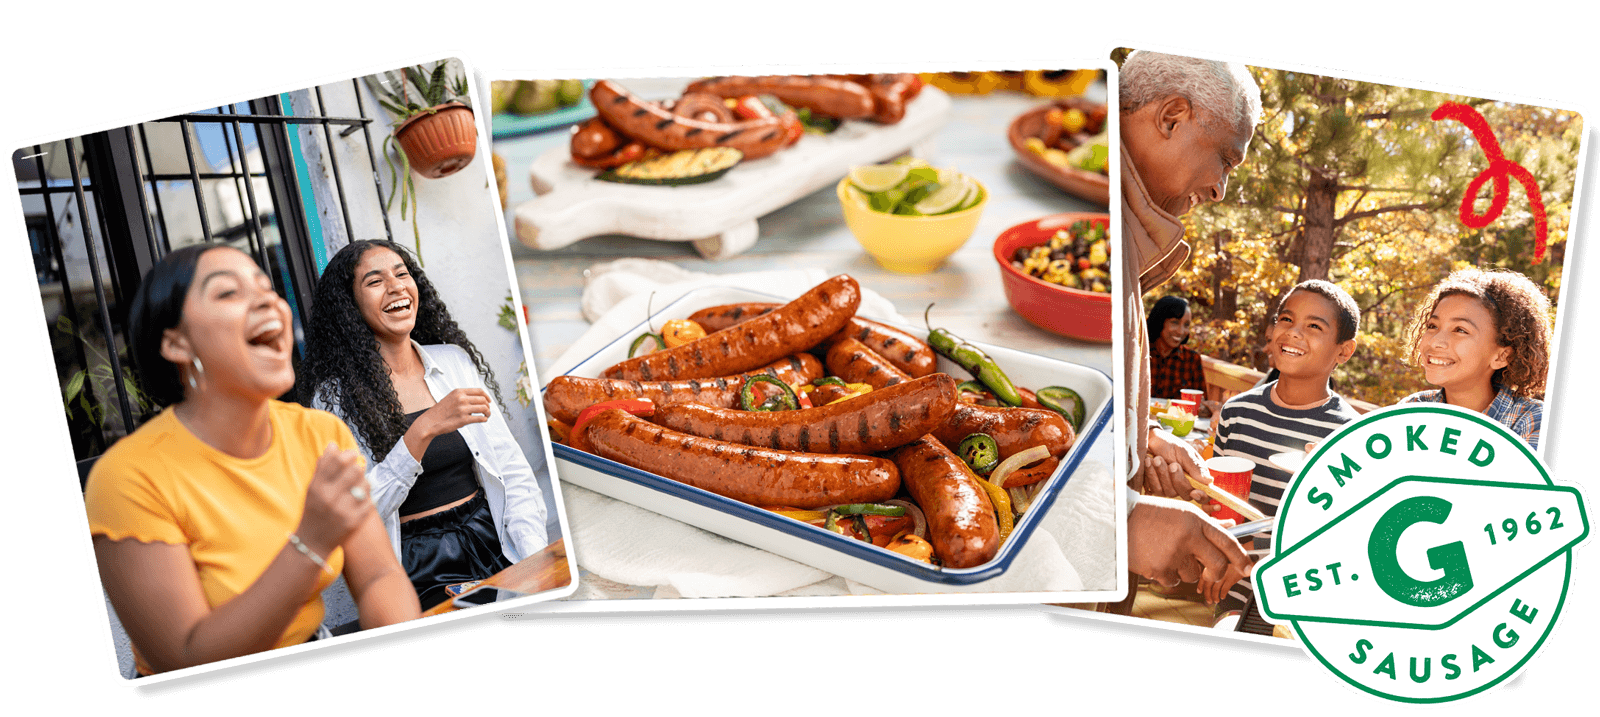 Garcia Smoked Sausages enjoyed by family and friends for years.